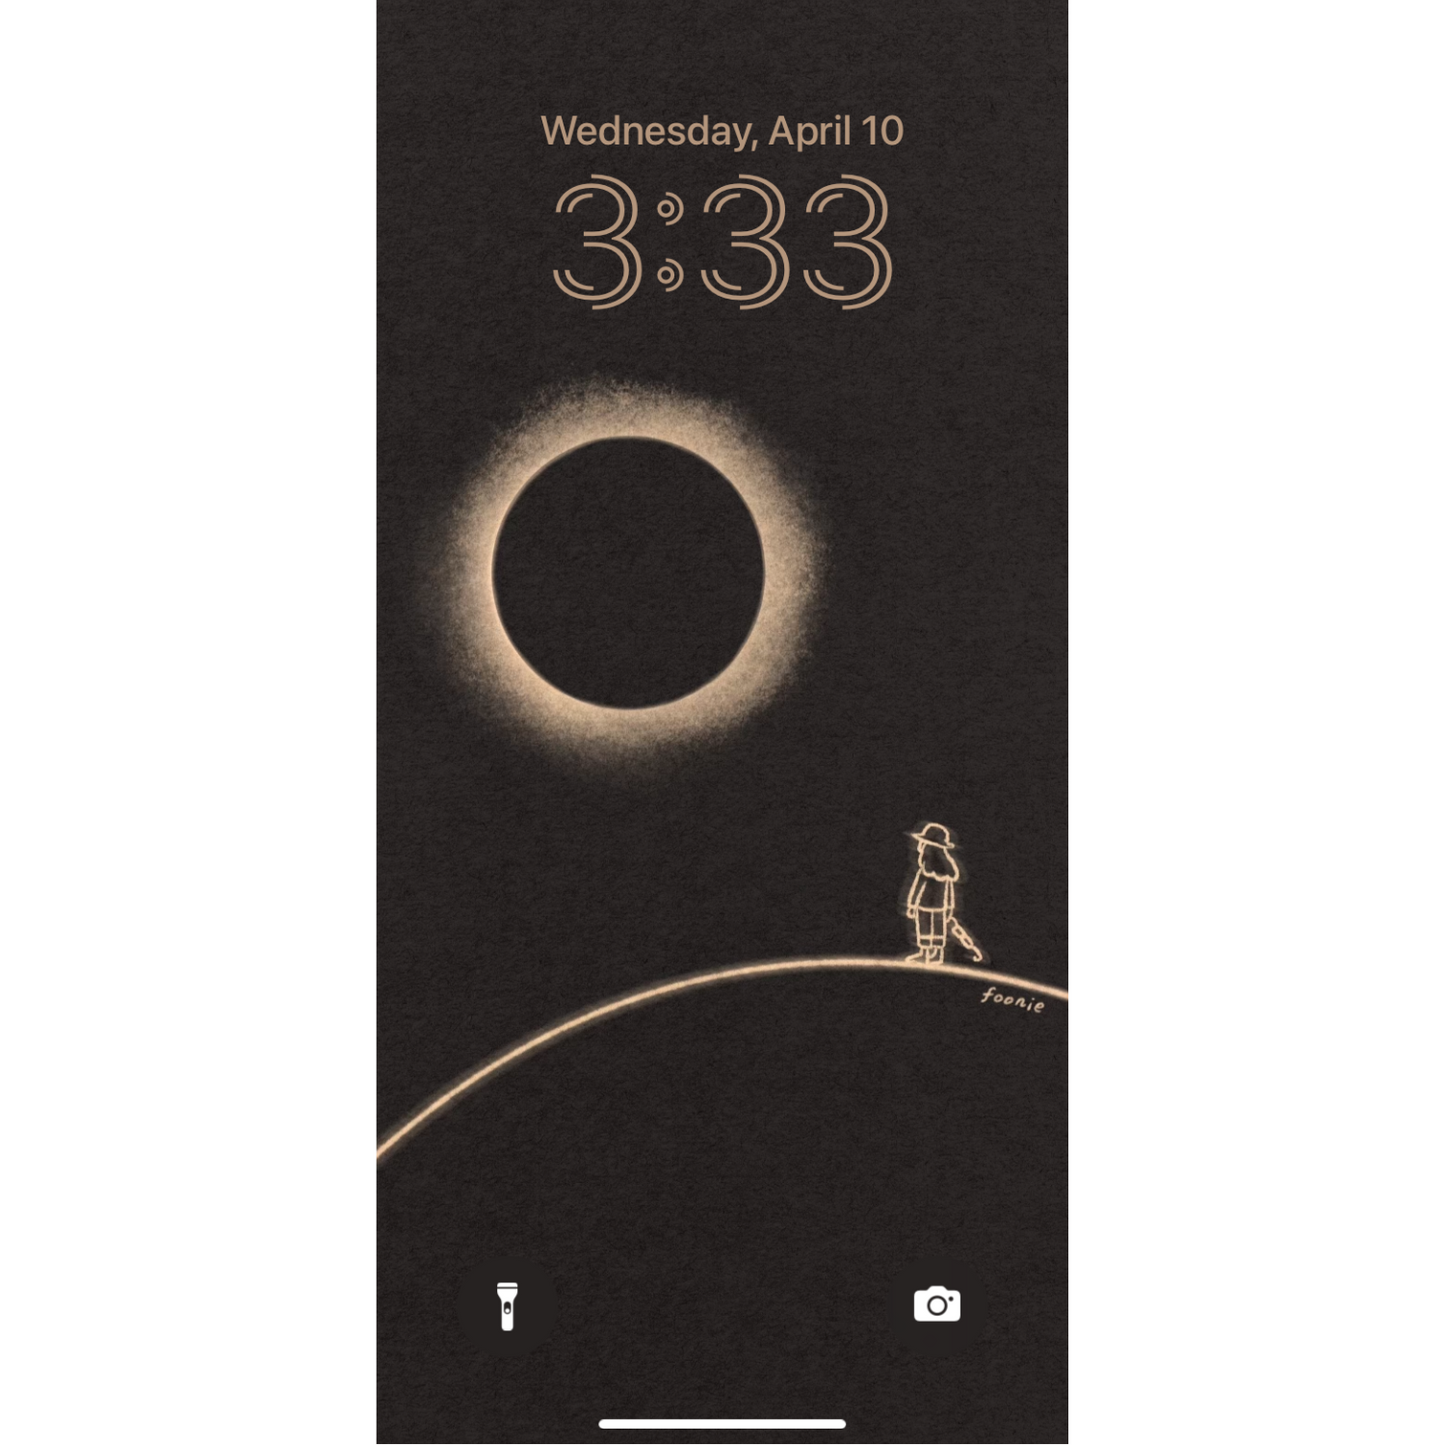 Eclipse iPhone Wallpaper (Free)